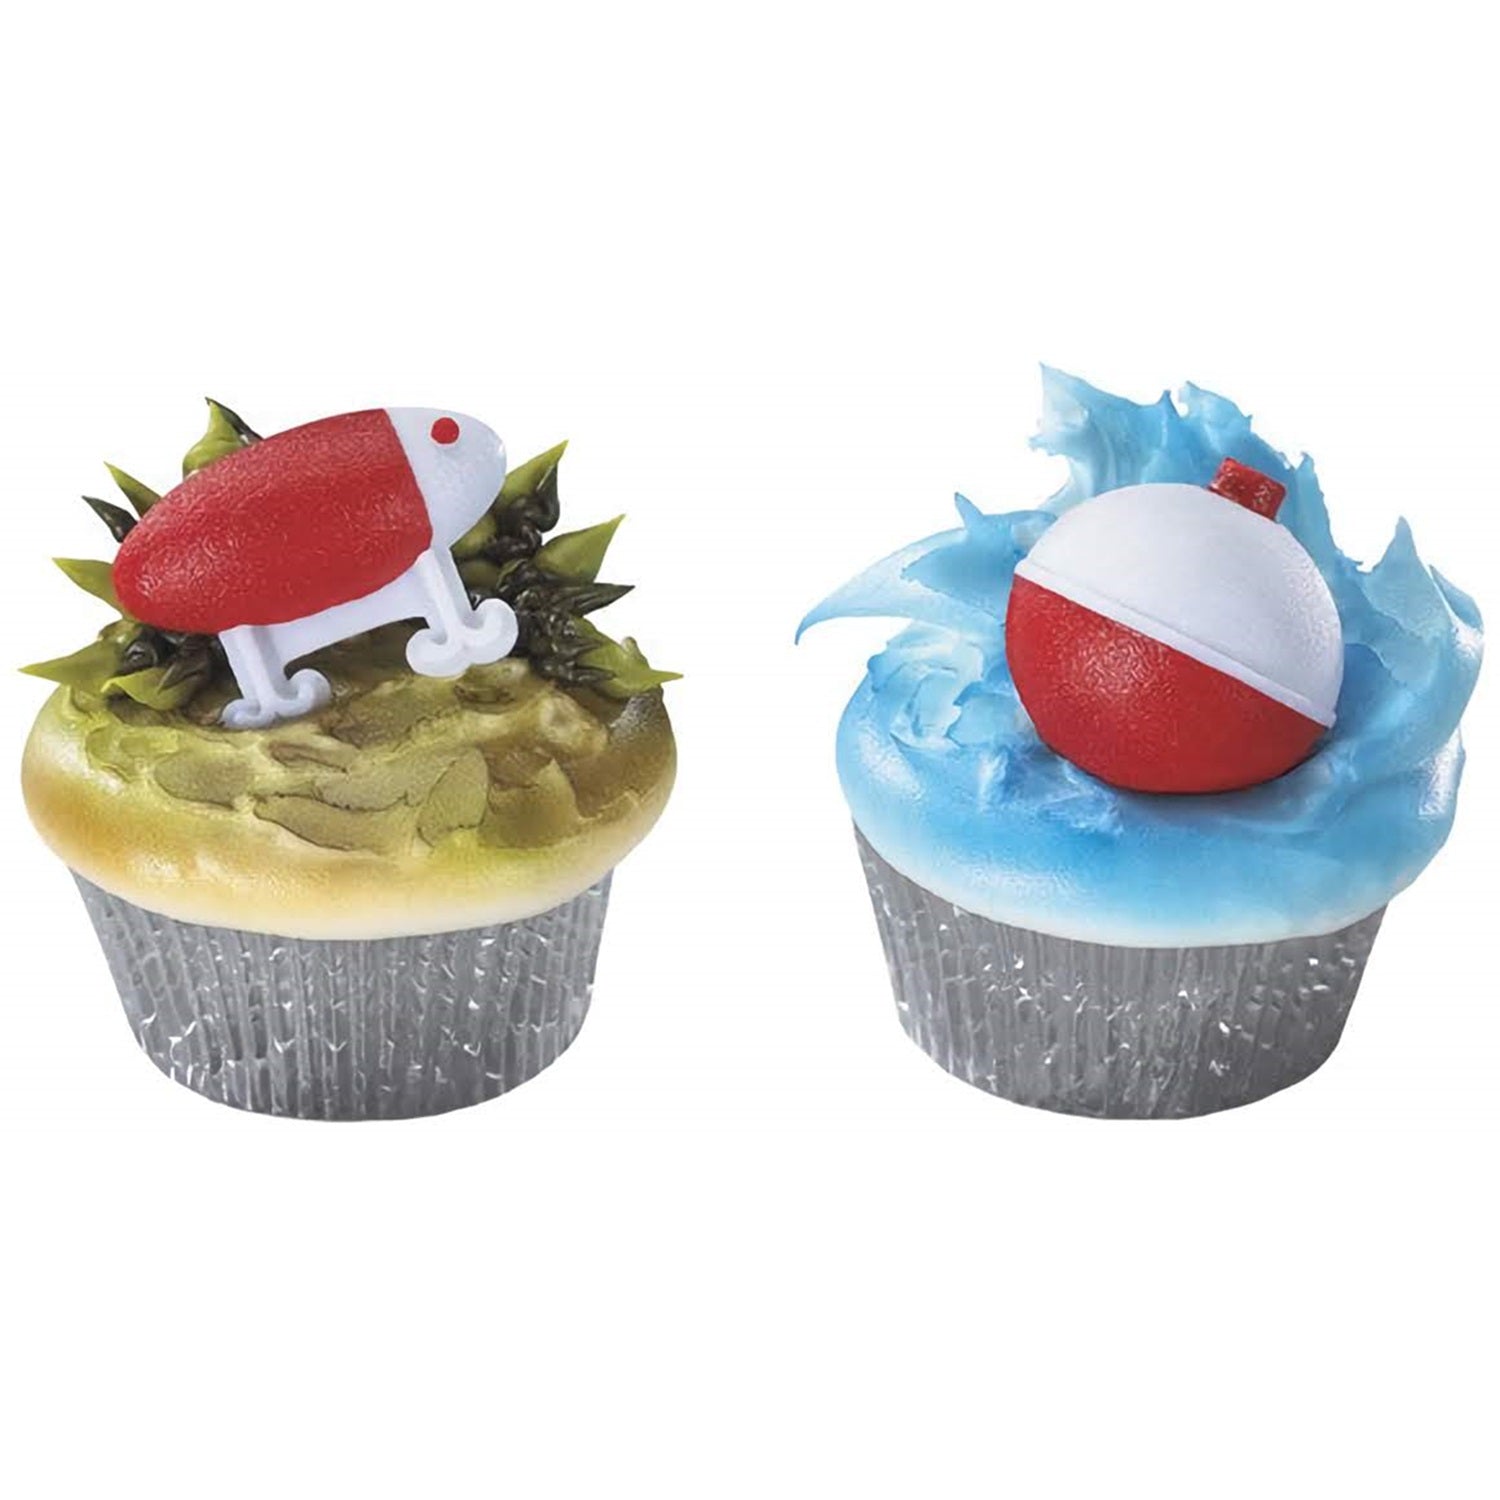 Fishing lure and bobber cupcake topper rings set, featuring a red and white bobber and detailed fish-shaped lures in various colors, perfect for a fishing-themed party or to celebrate a fishing trip.